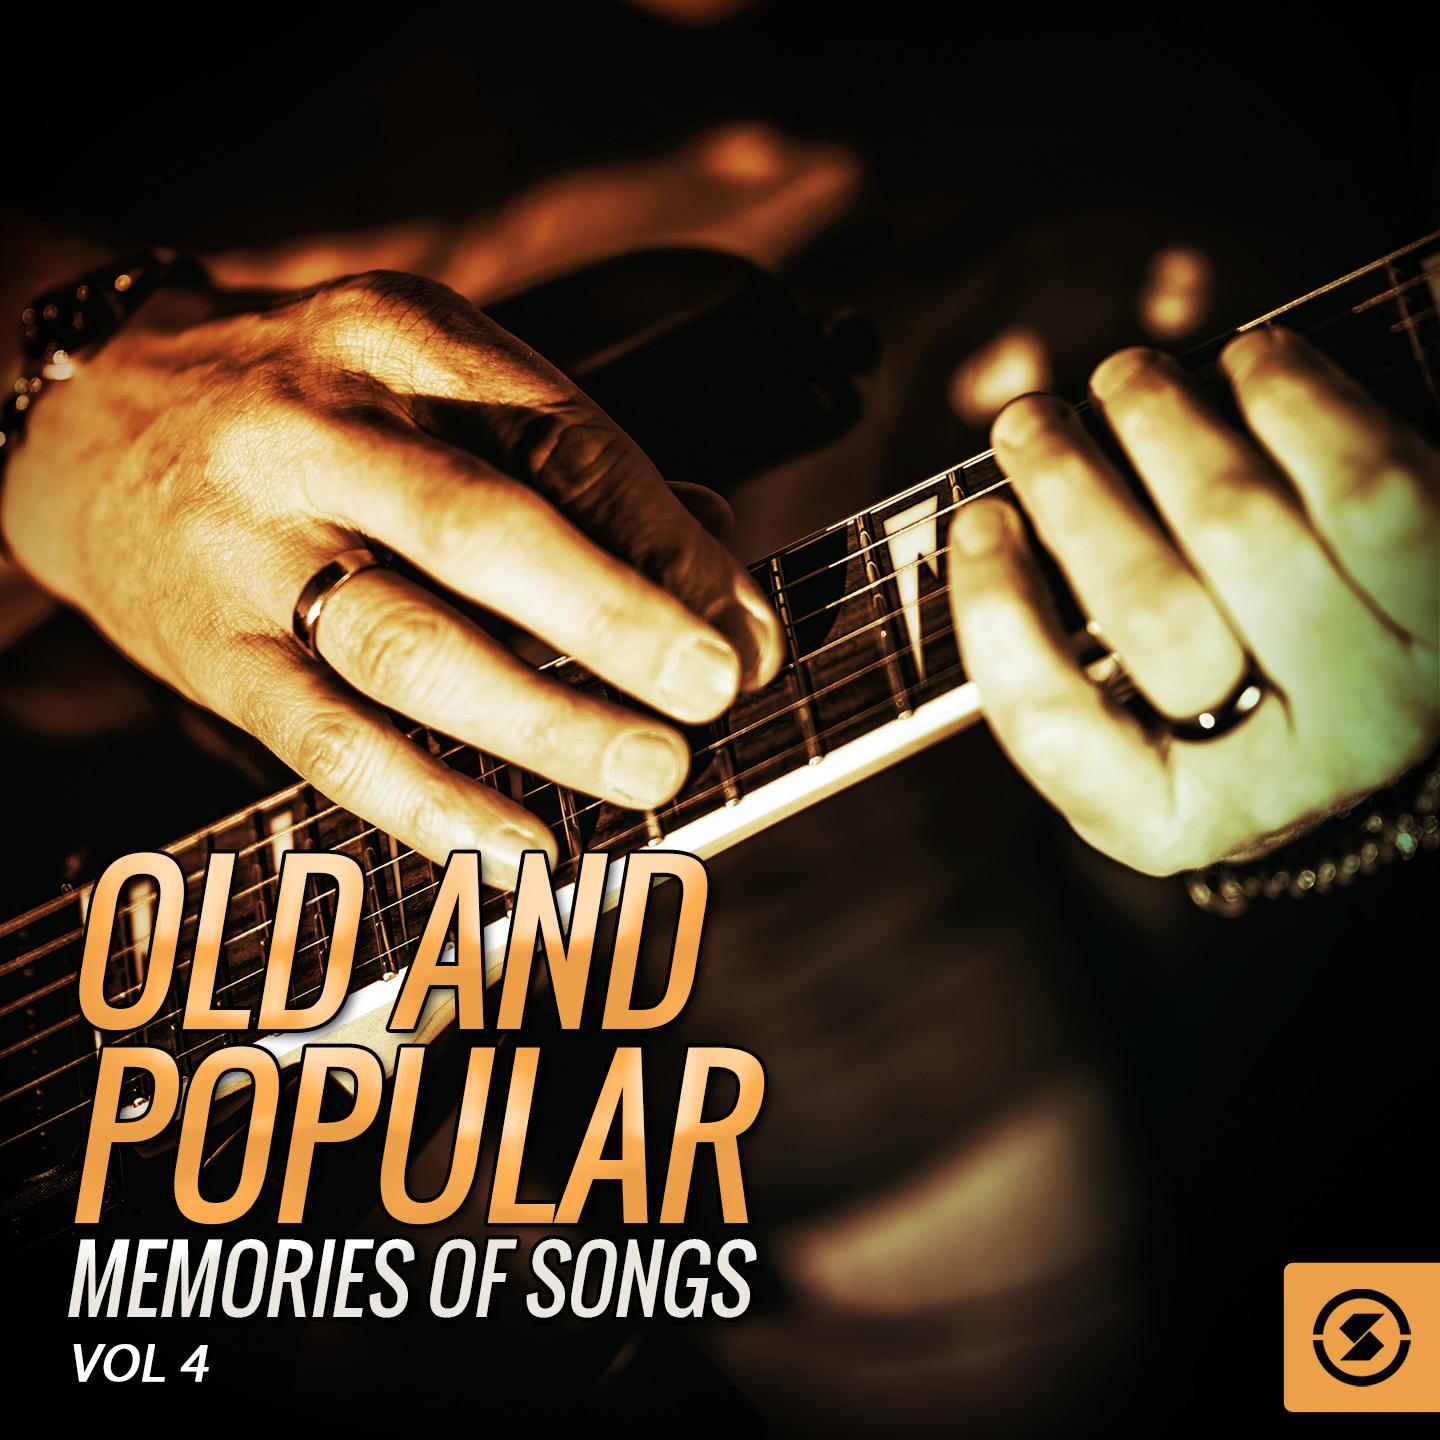 Old and Popular Memories of Songs, Vol. 4